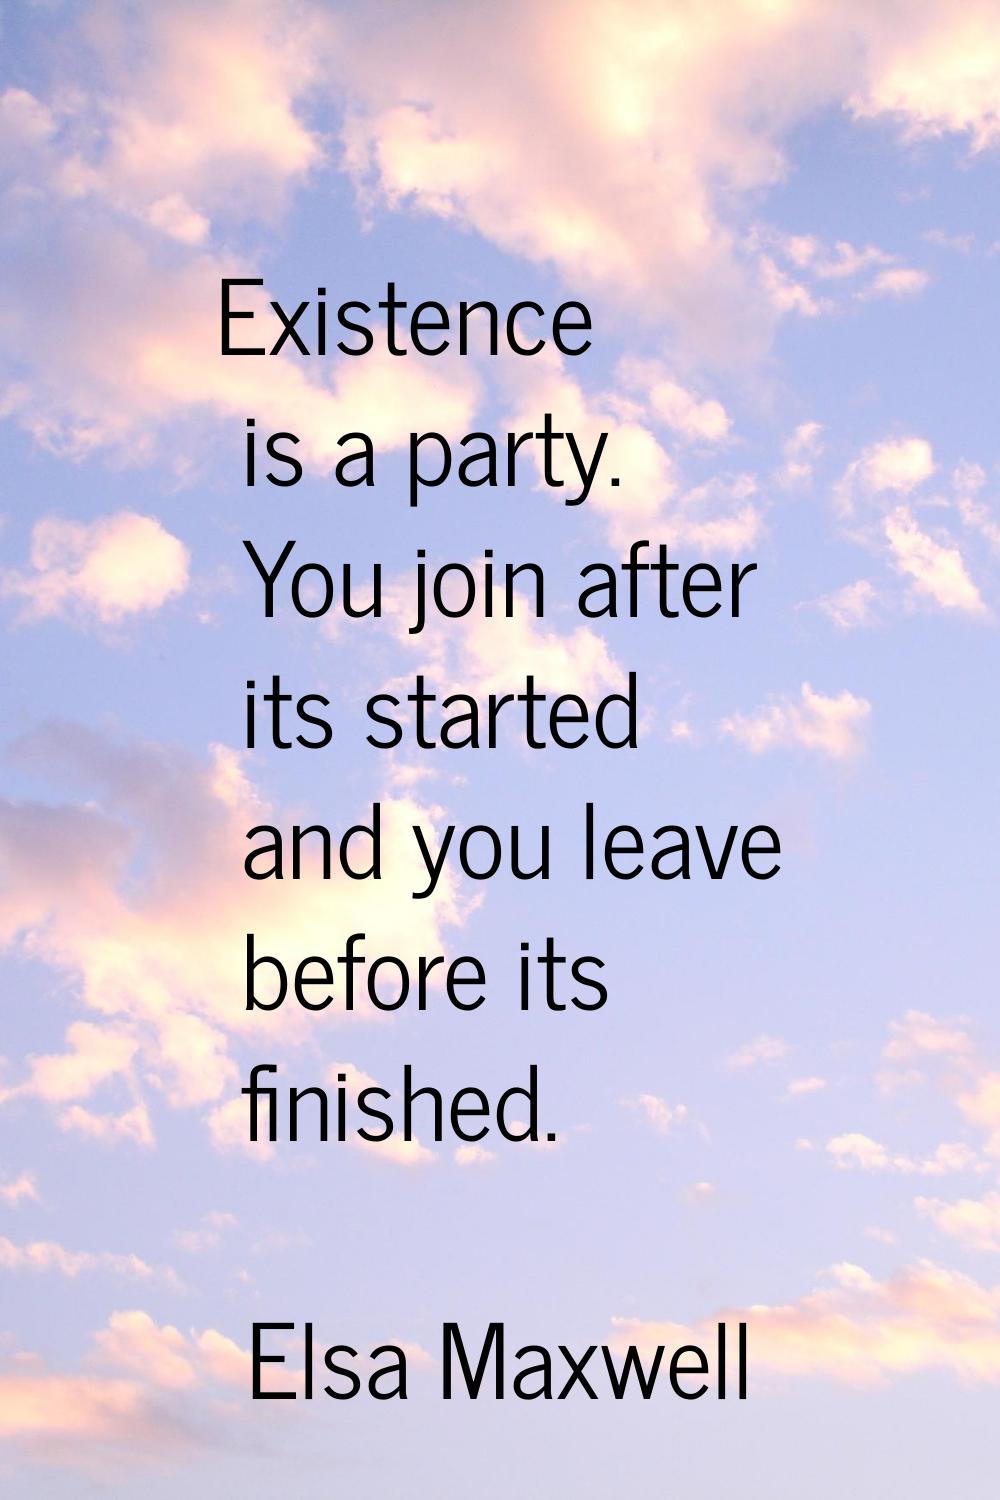 Existence is a party. You join after its started and you leave before its finished.